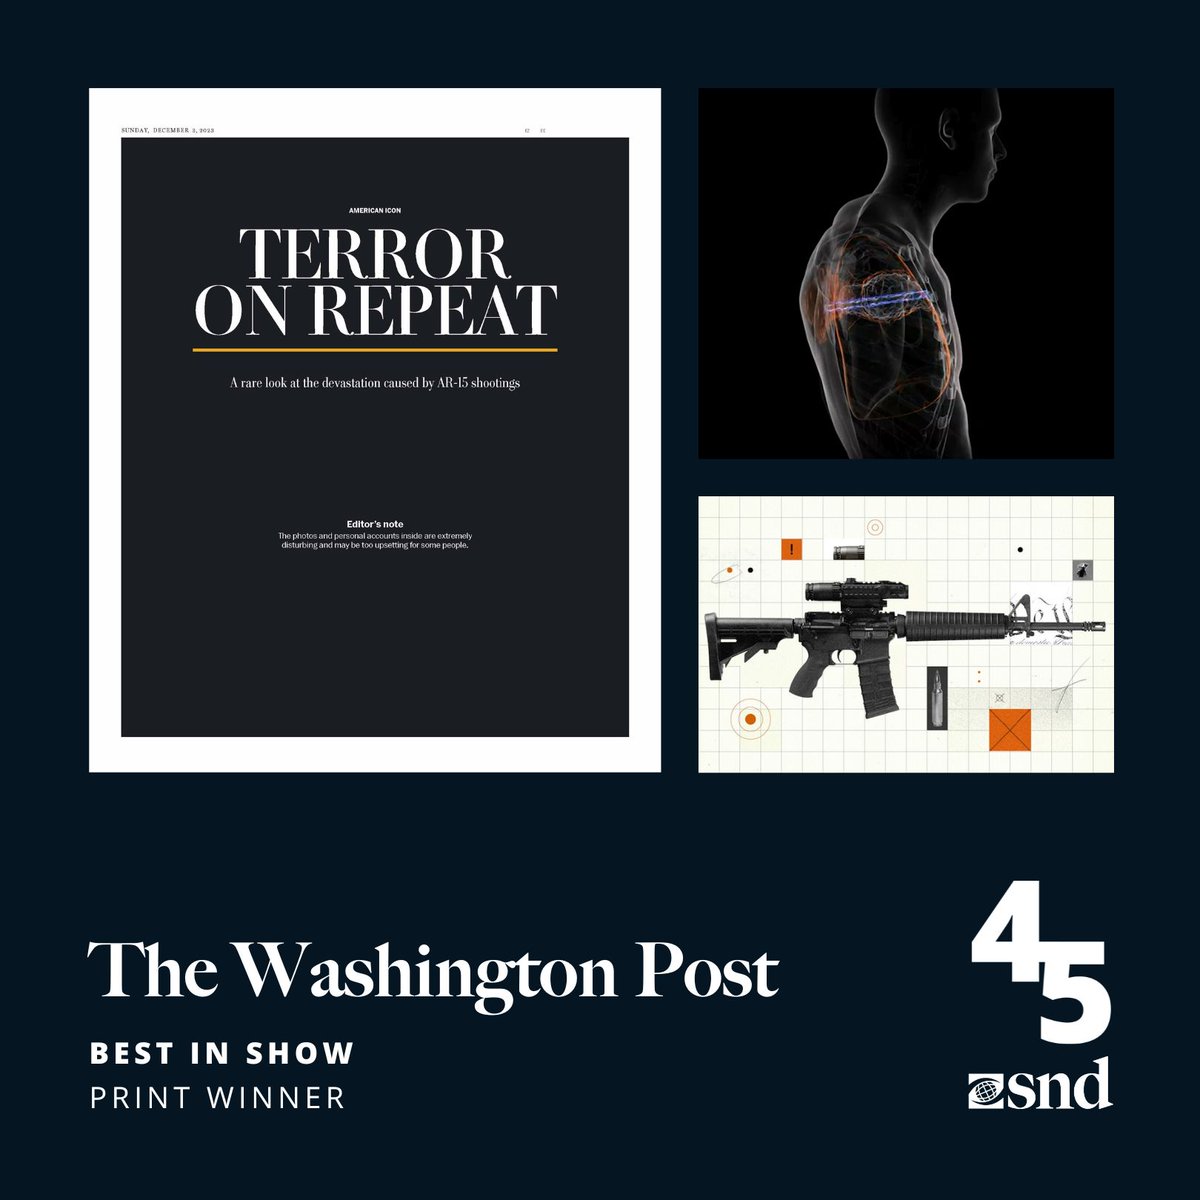 Print | @washingtonpost | American Icon Judges said: “The courage to publish such content demonstrates extreme craftsmanship and sensitivity, with impressive restraint shown throughout.”